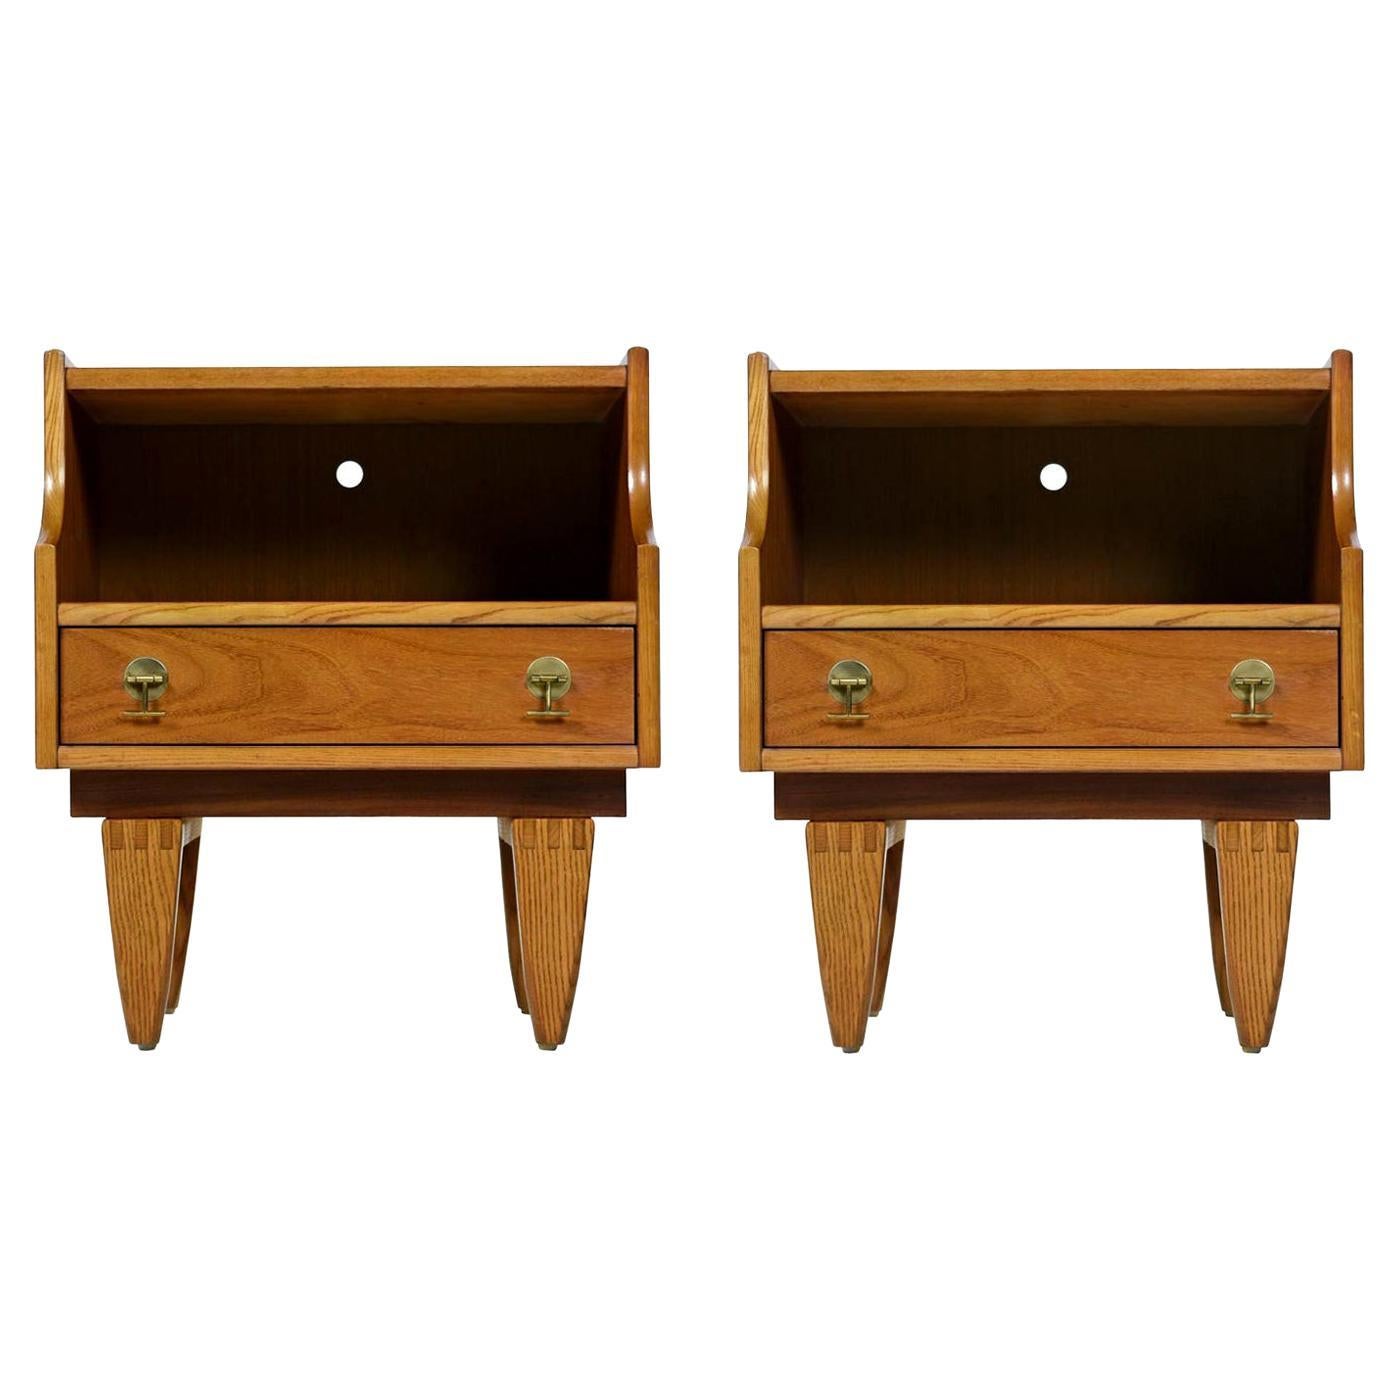 Teak Nightstand End Tables with Brass Hardware by Stanley, Mid-Century Modern